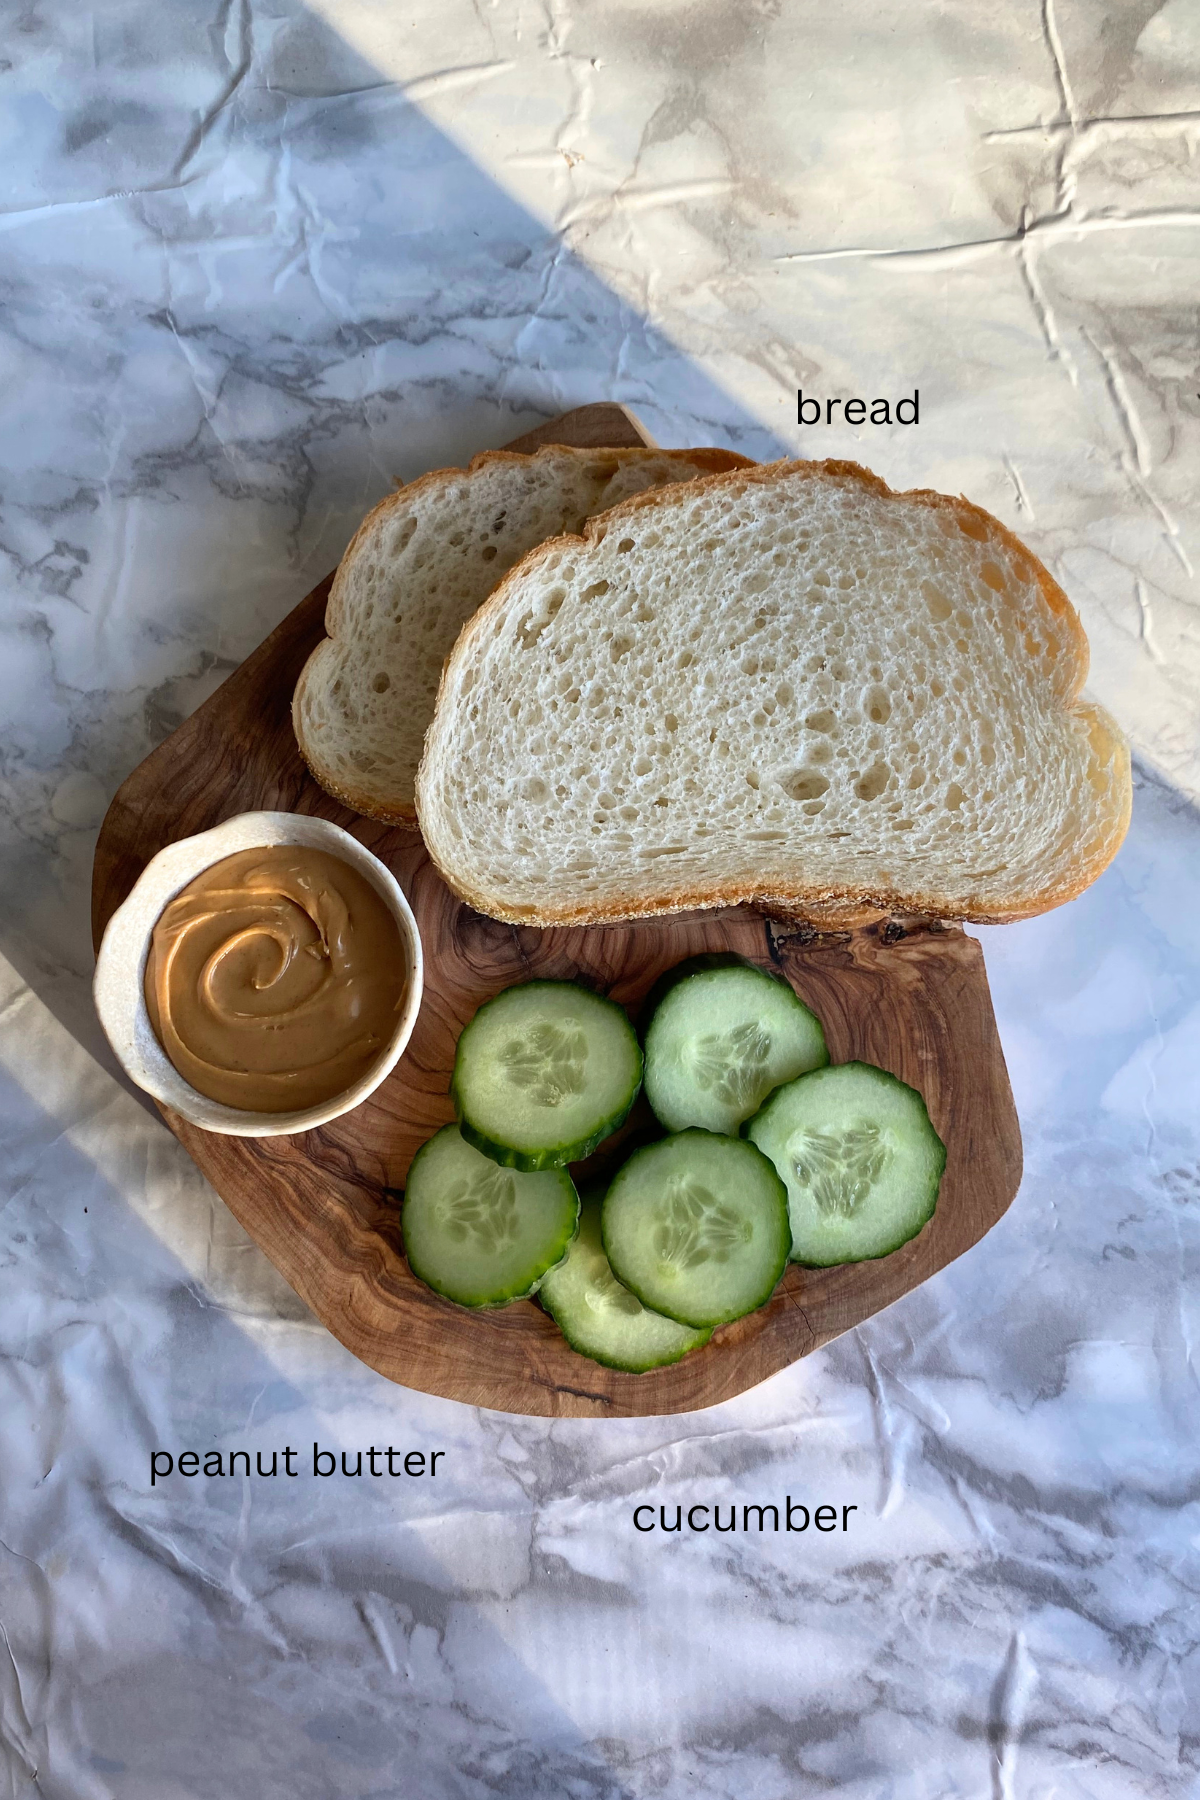 Peanut butter cucumber sandwich ingredients with text.